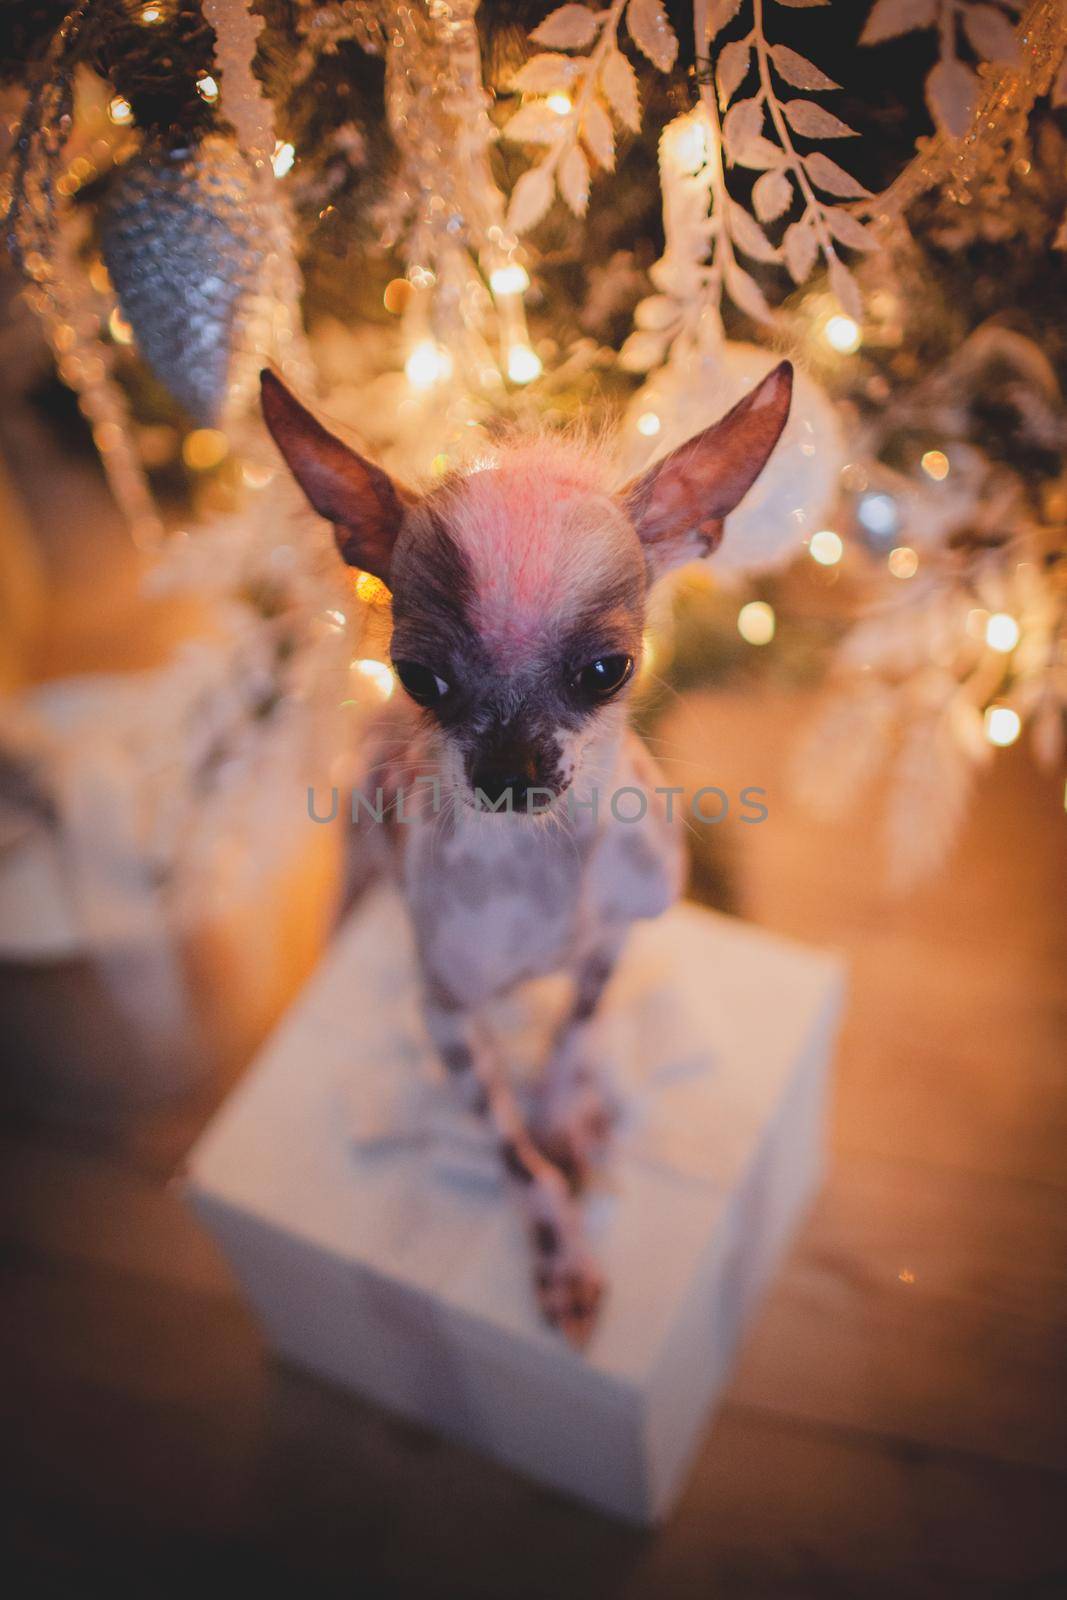 Ugly peruvian hairless and chihuahua mix dog in festivaly decorated room with Christmass tree. New Years celebration.